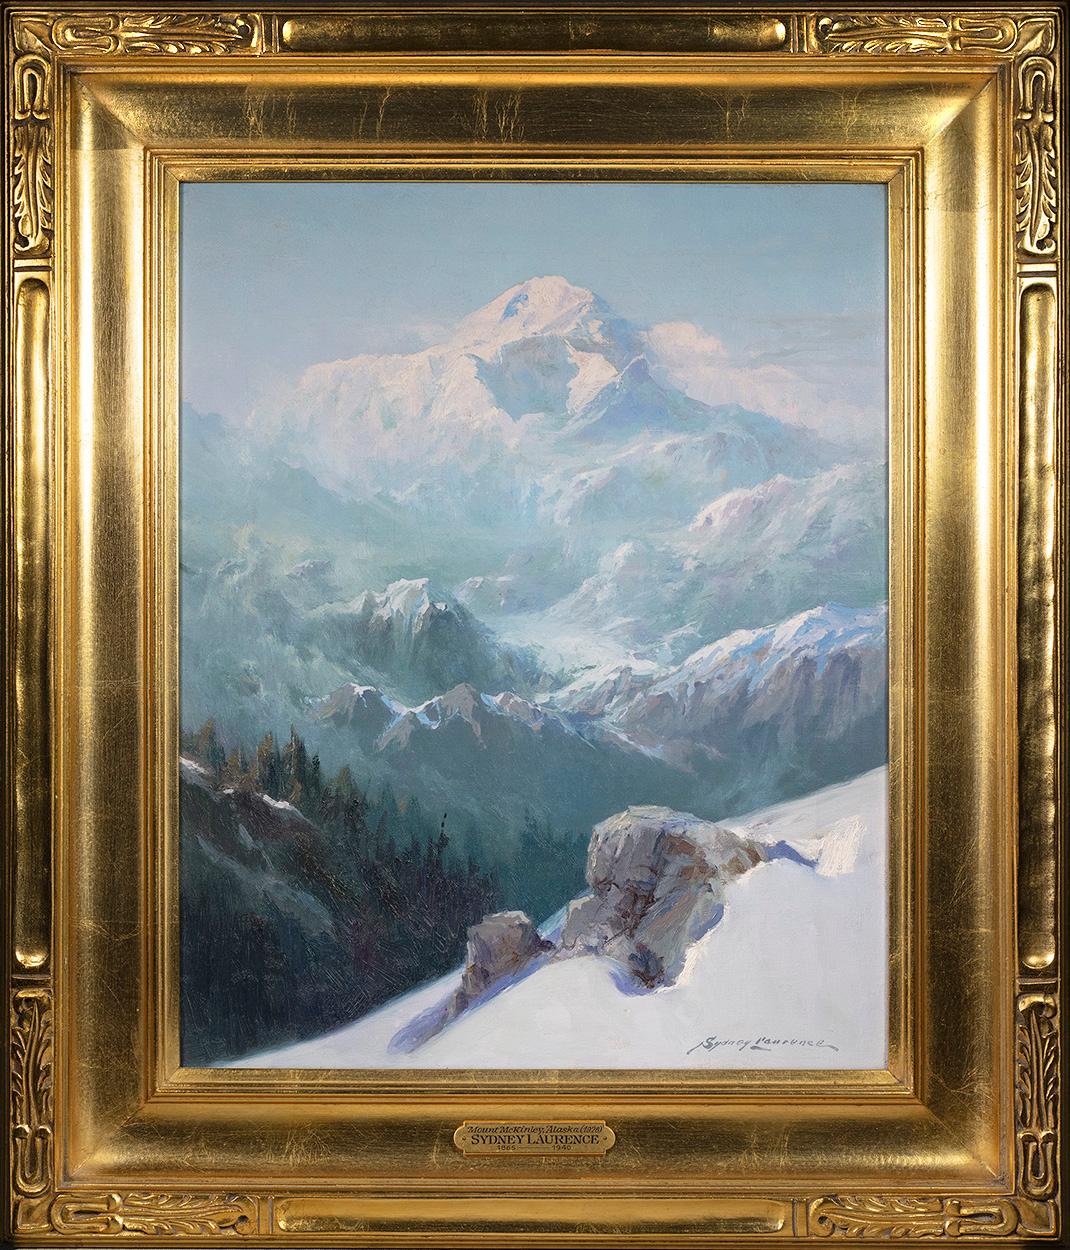 Mount McKinley, Alaska  - Painting by Sydney Laurence 